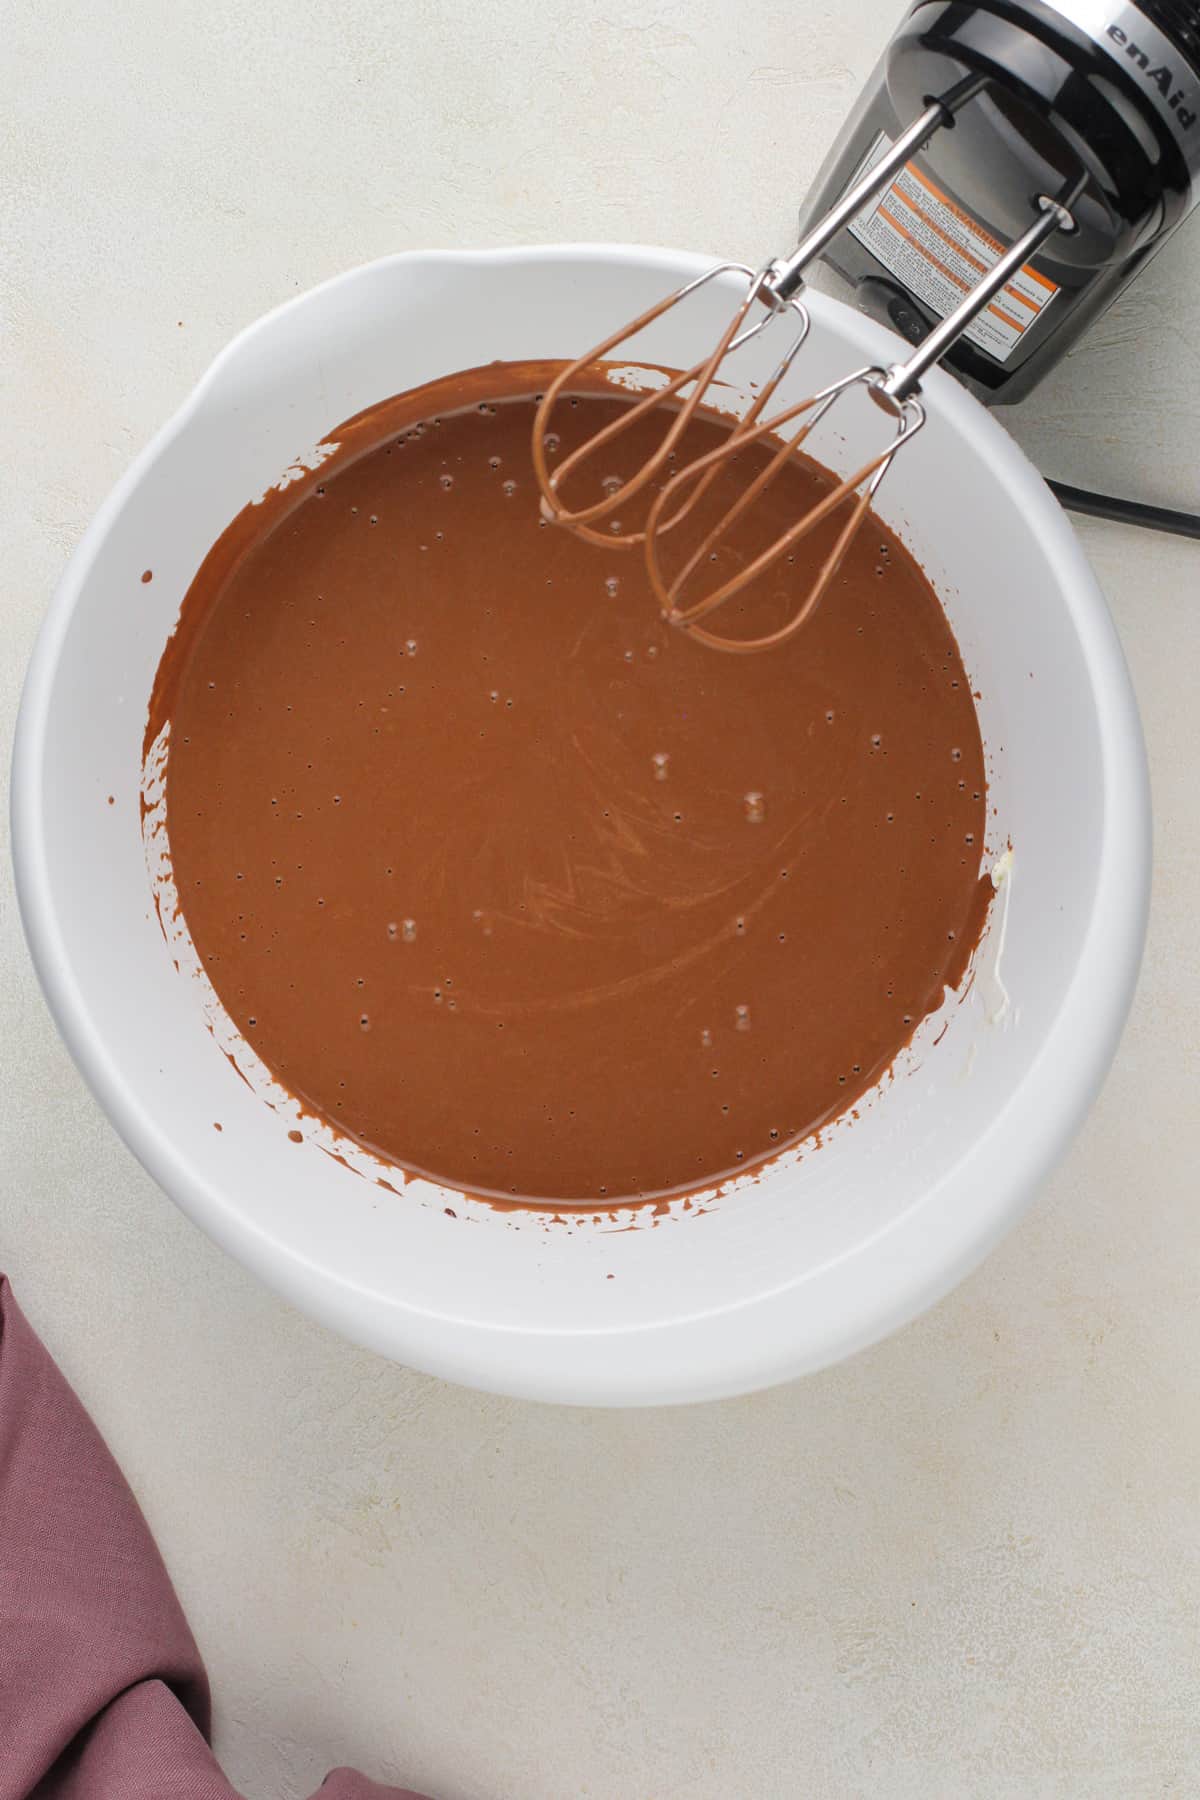 Wet ingredients for chocolate guinness cake in a white bowl.